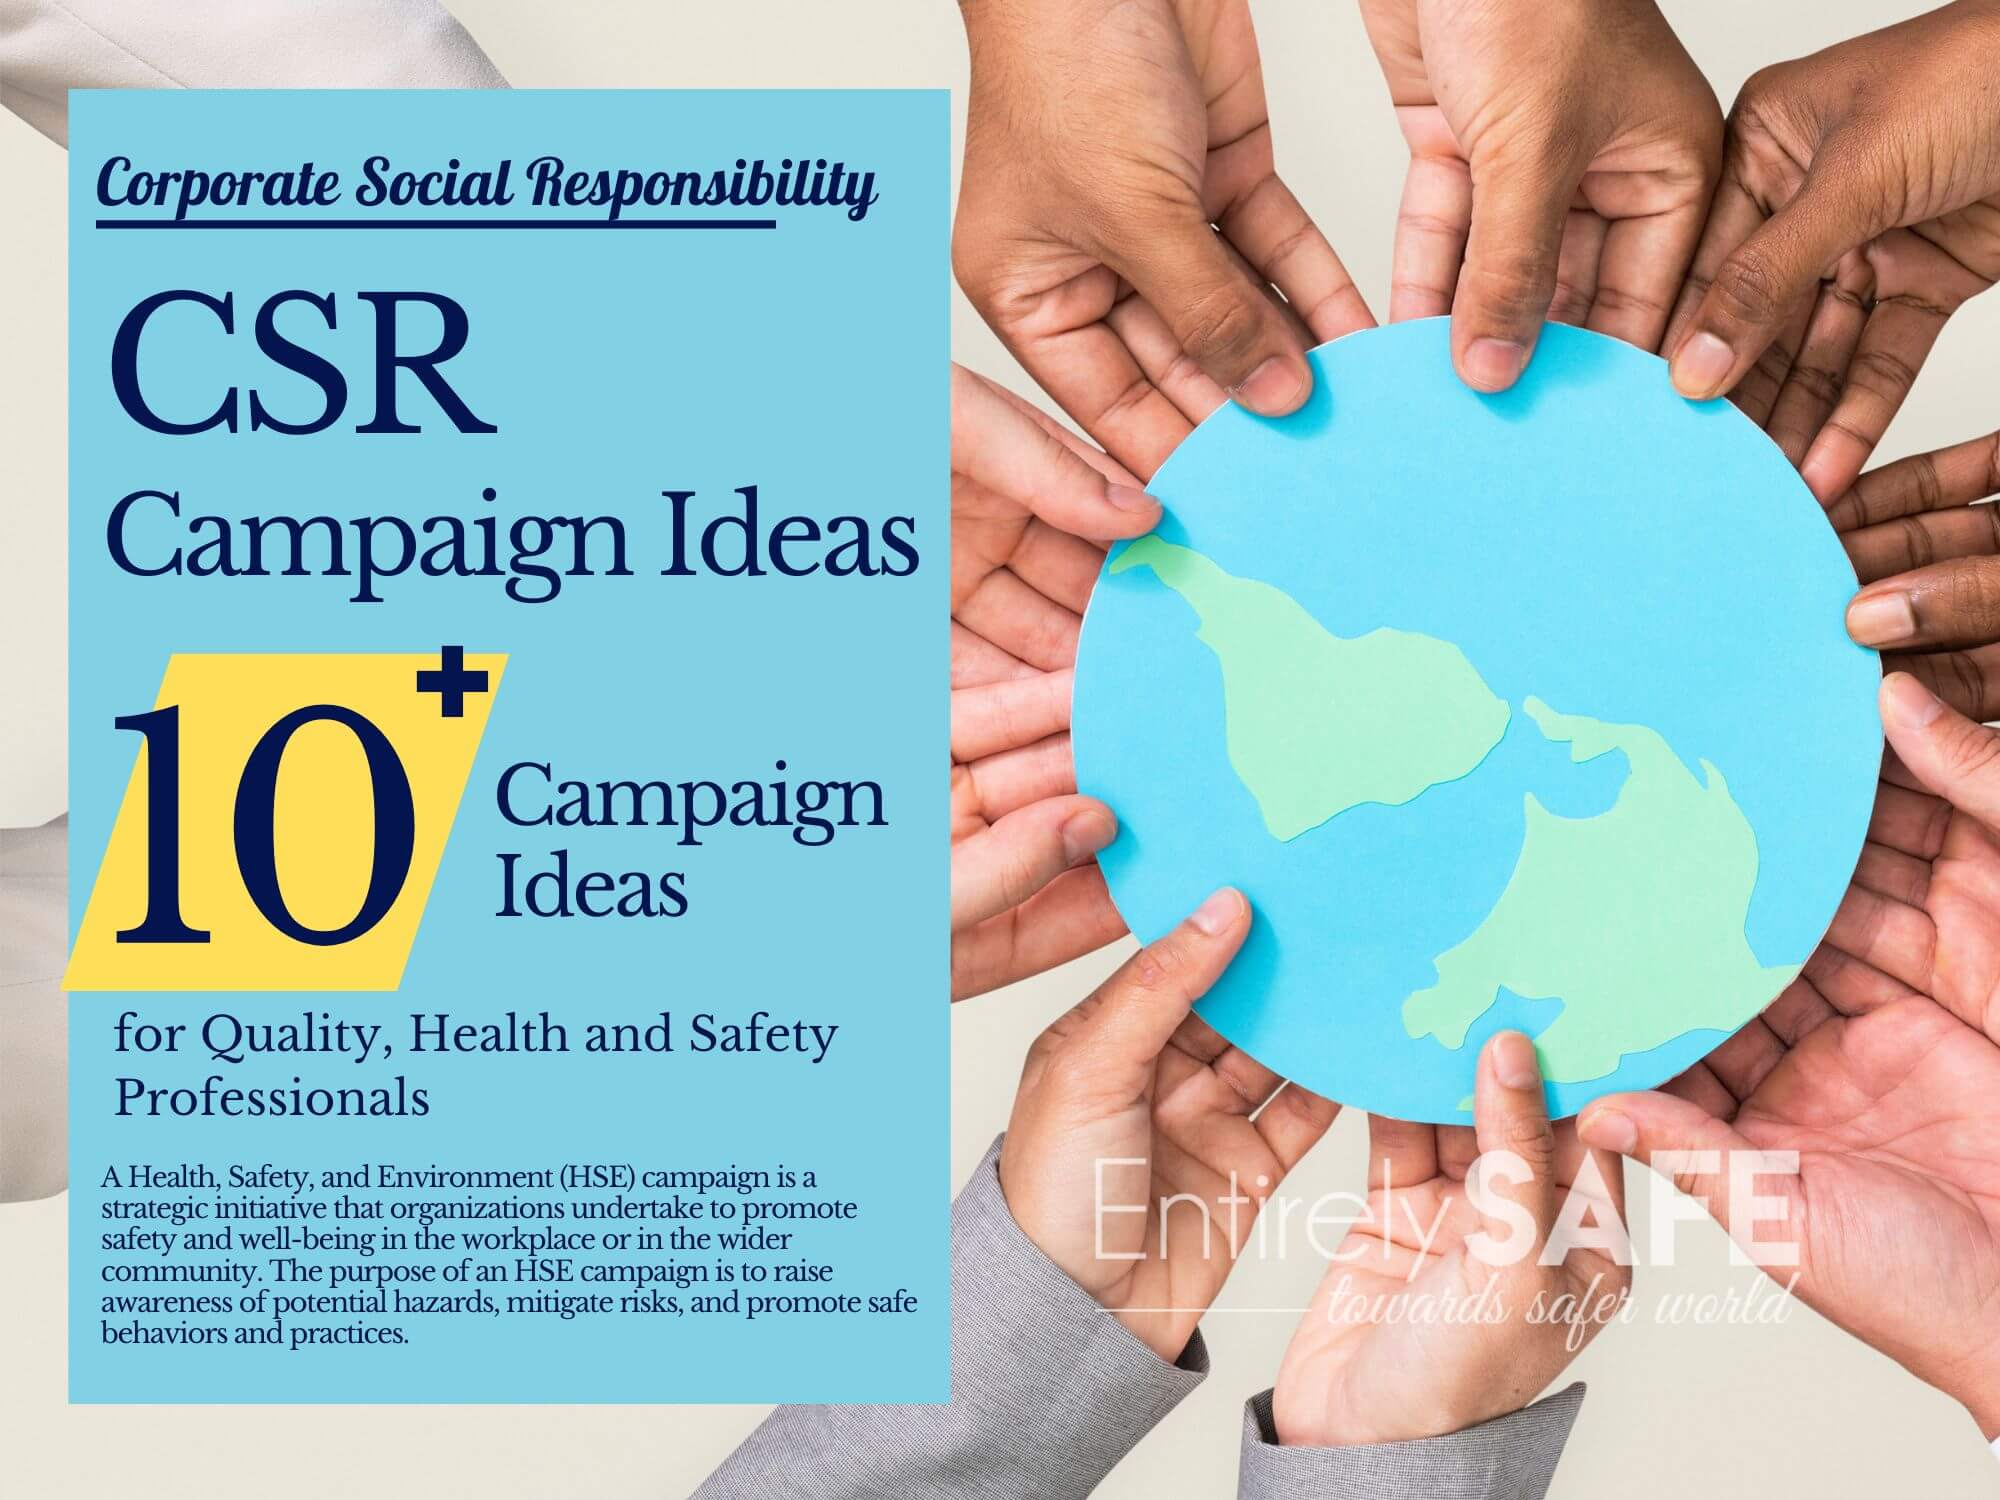 Corporate Social Responsibility (CSR) Campaign Ideas (includes real life examples)